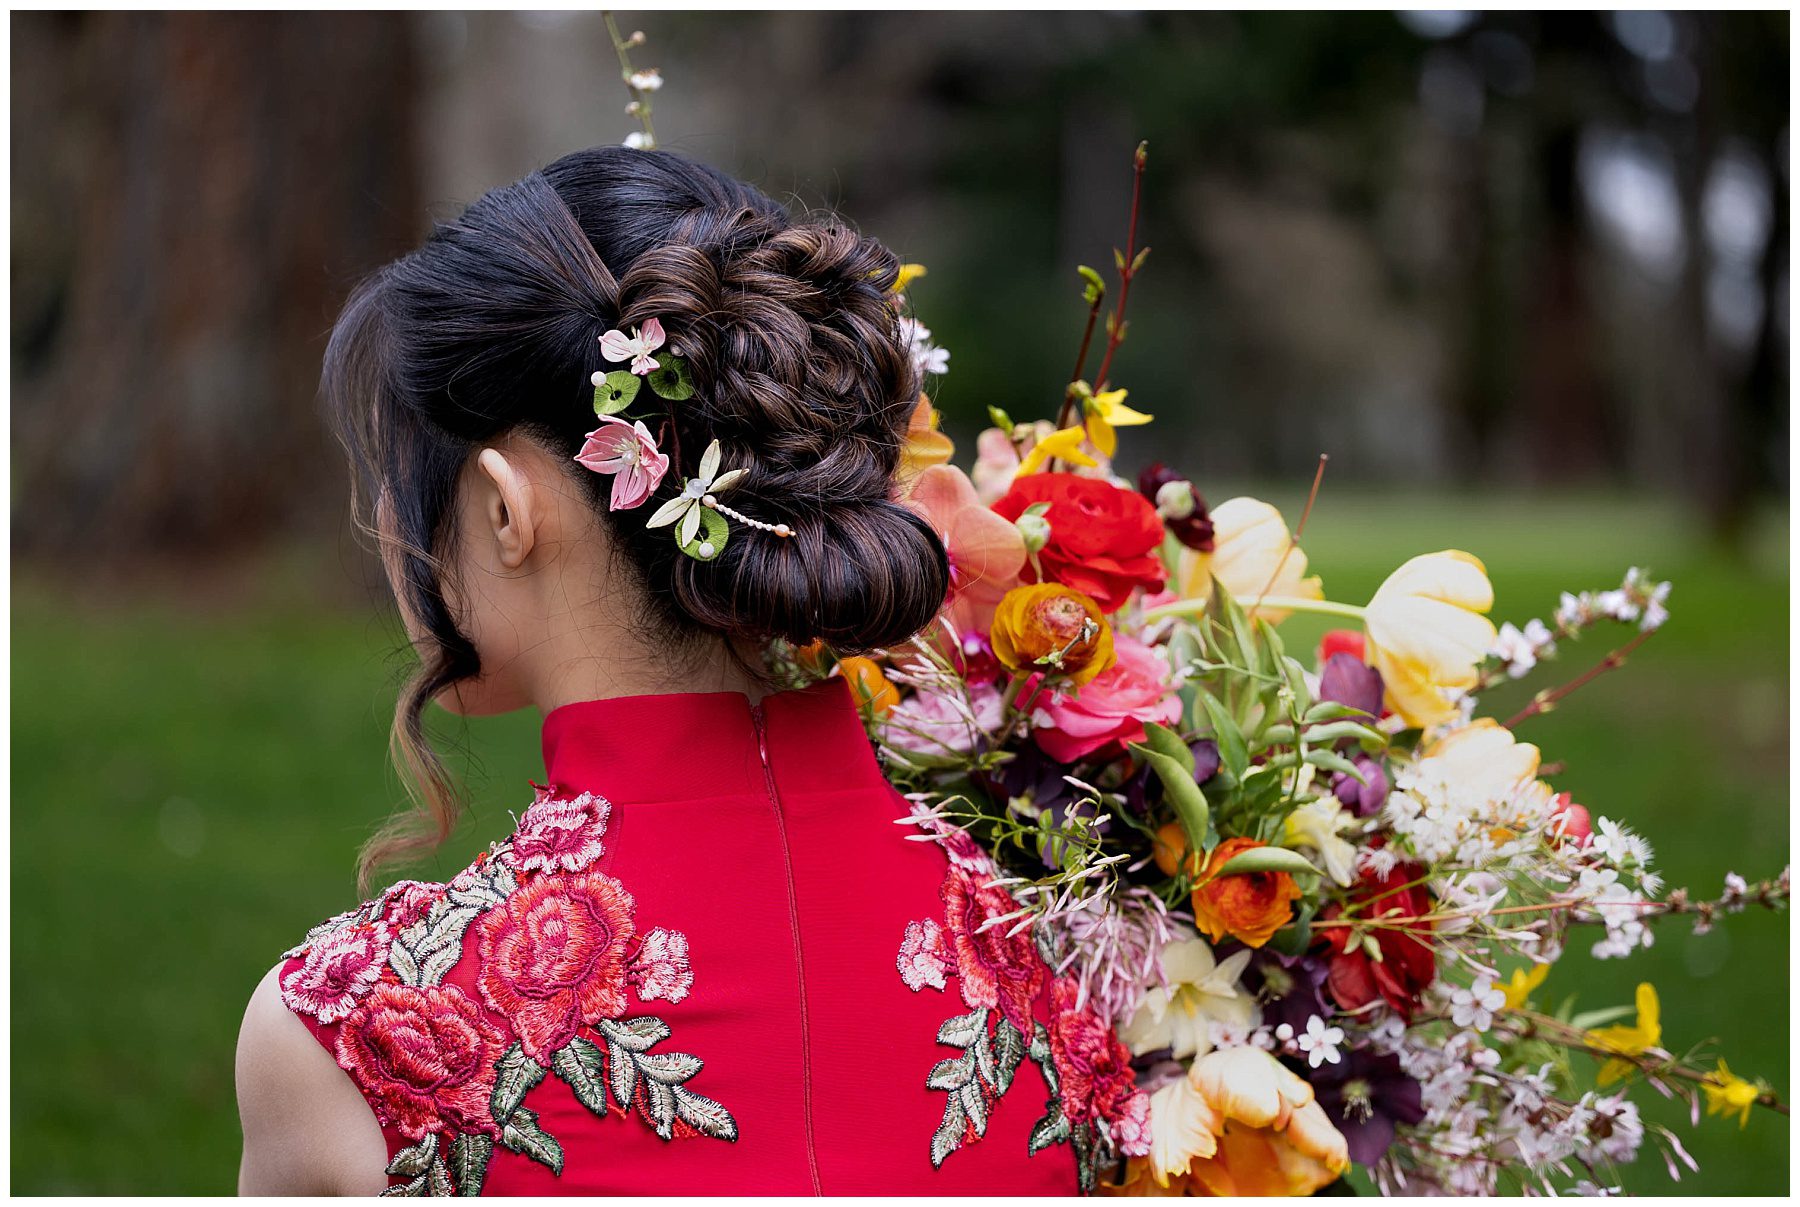 updo hair-do with red wedding dress